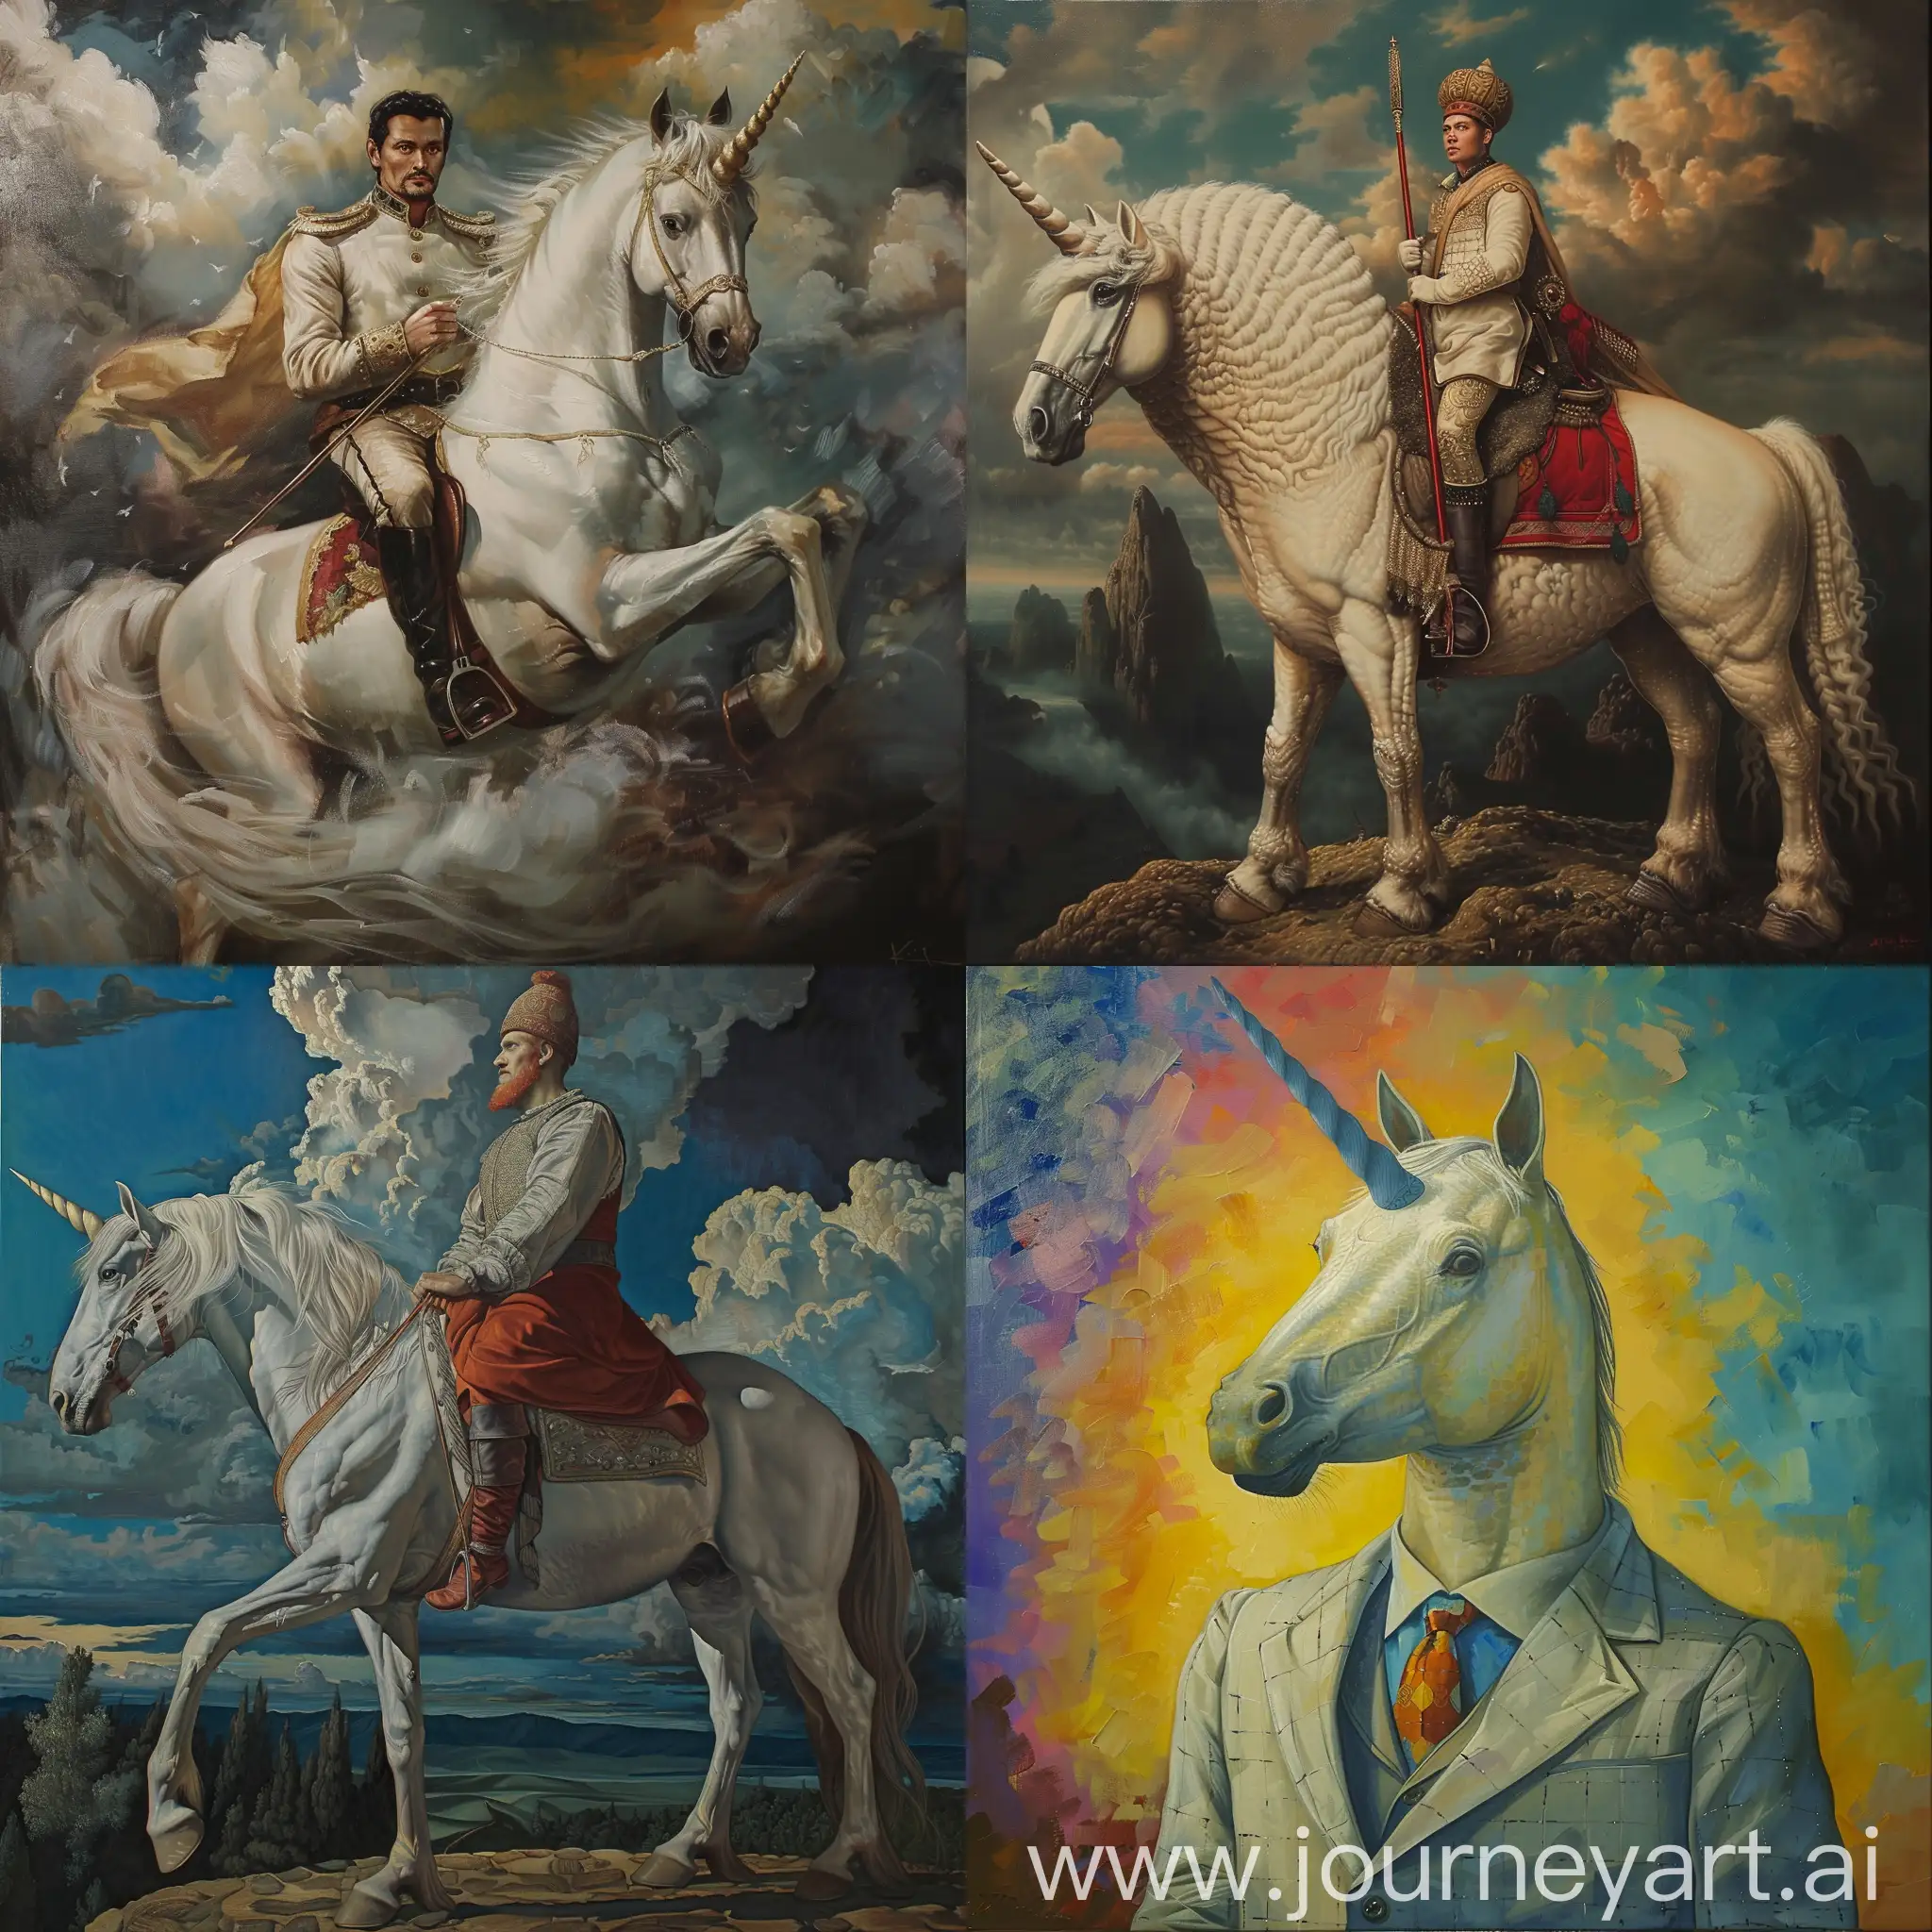 A startup becomes a unicorn thanks to a competent CEO who is kazakh, oil painting, renaissance style